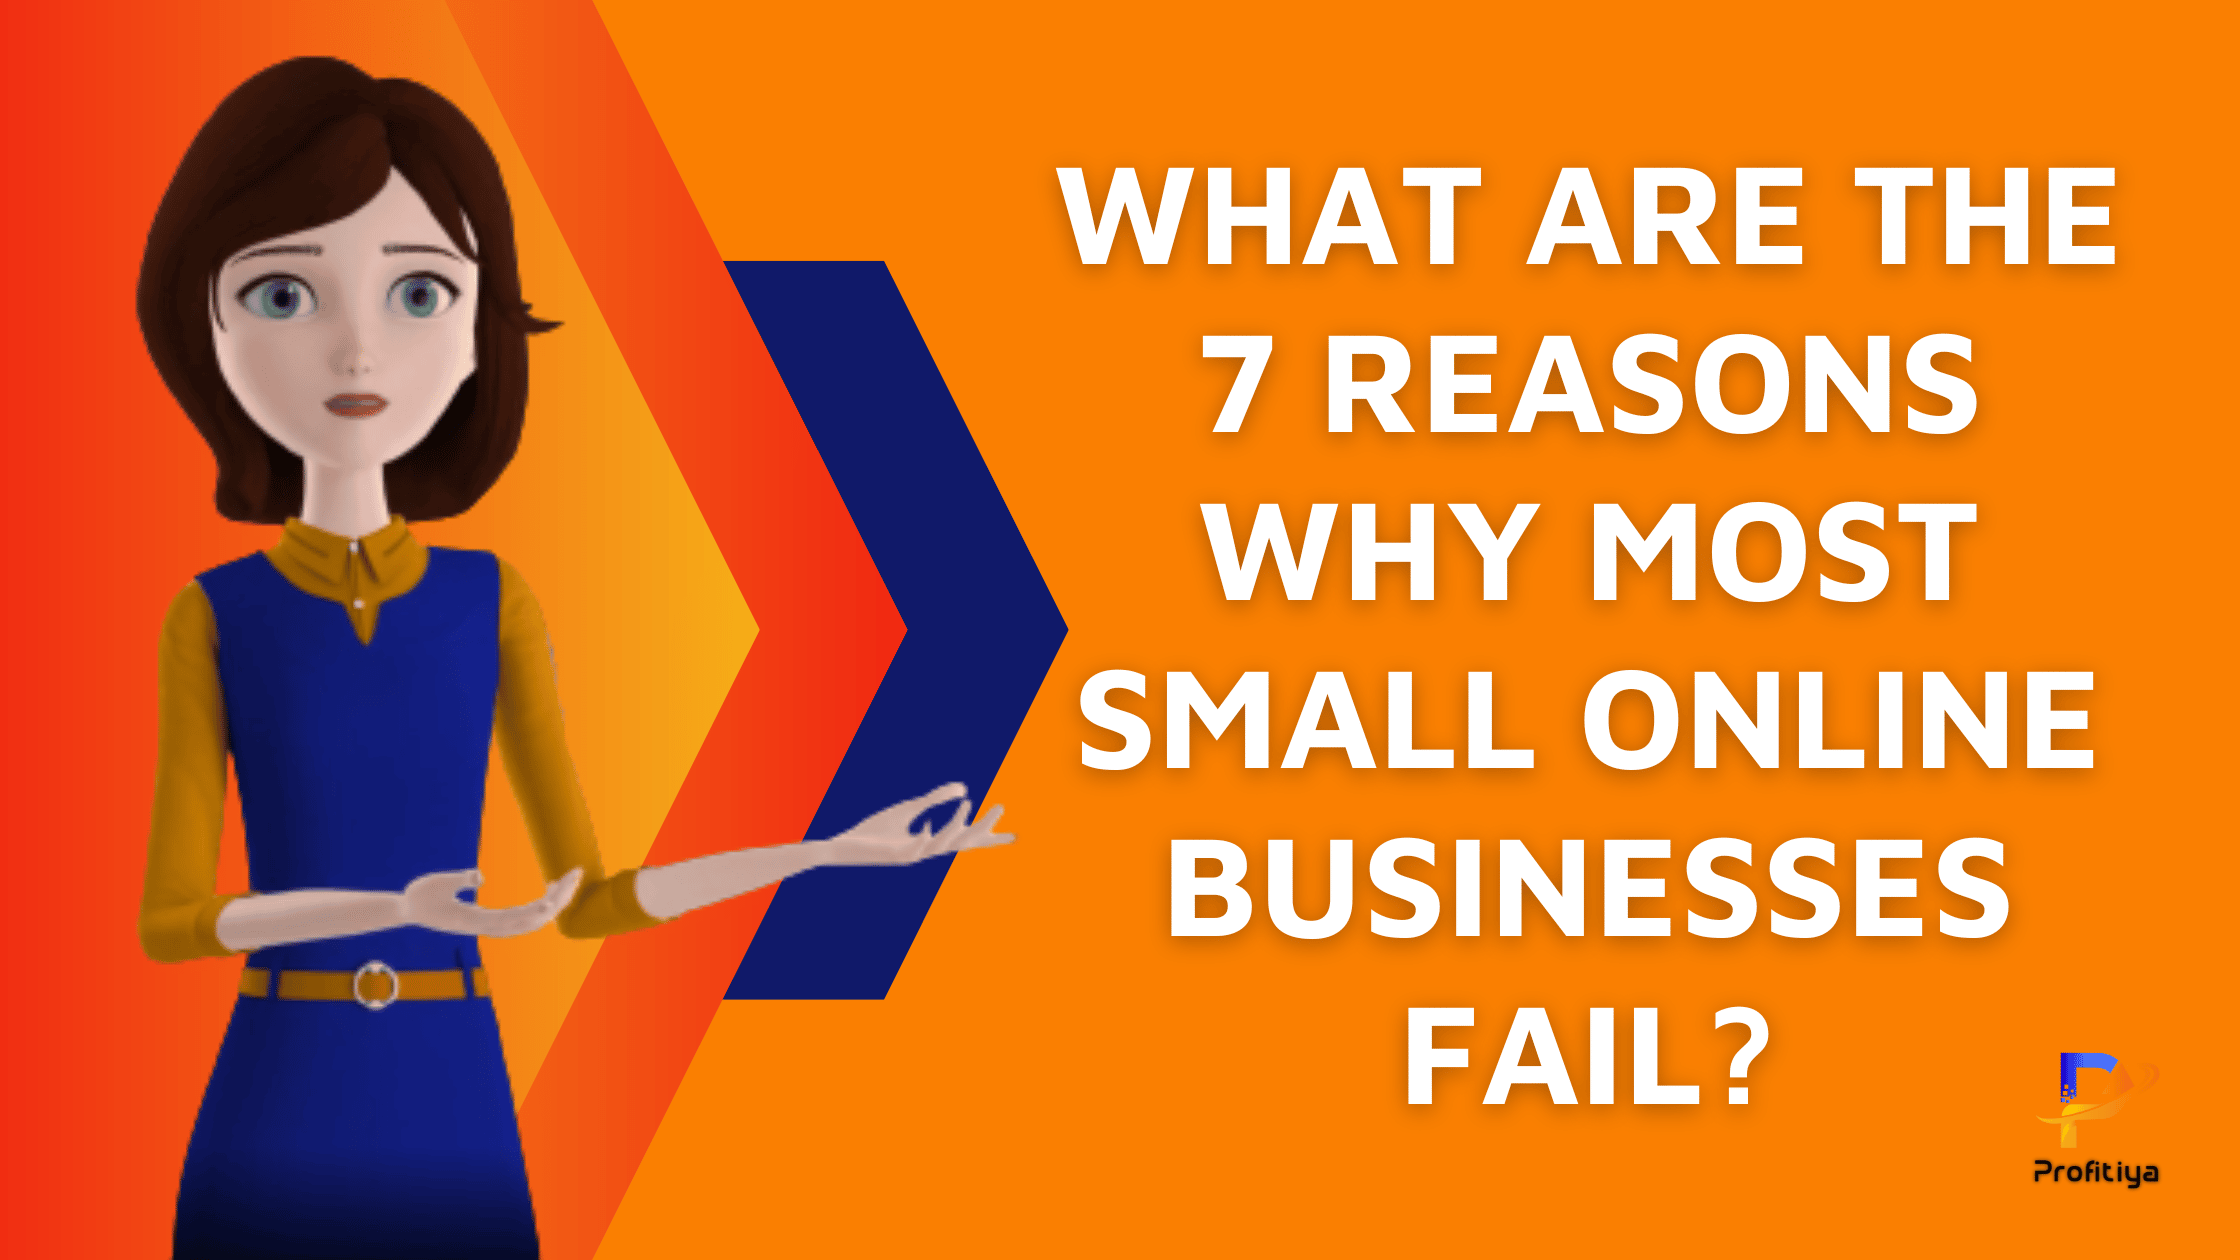 What Are The 7 Reasons Why Most Small Online Businesses Fail?